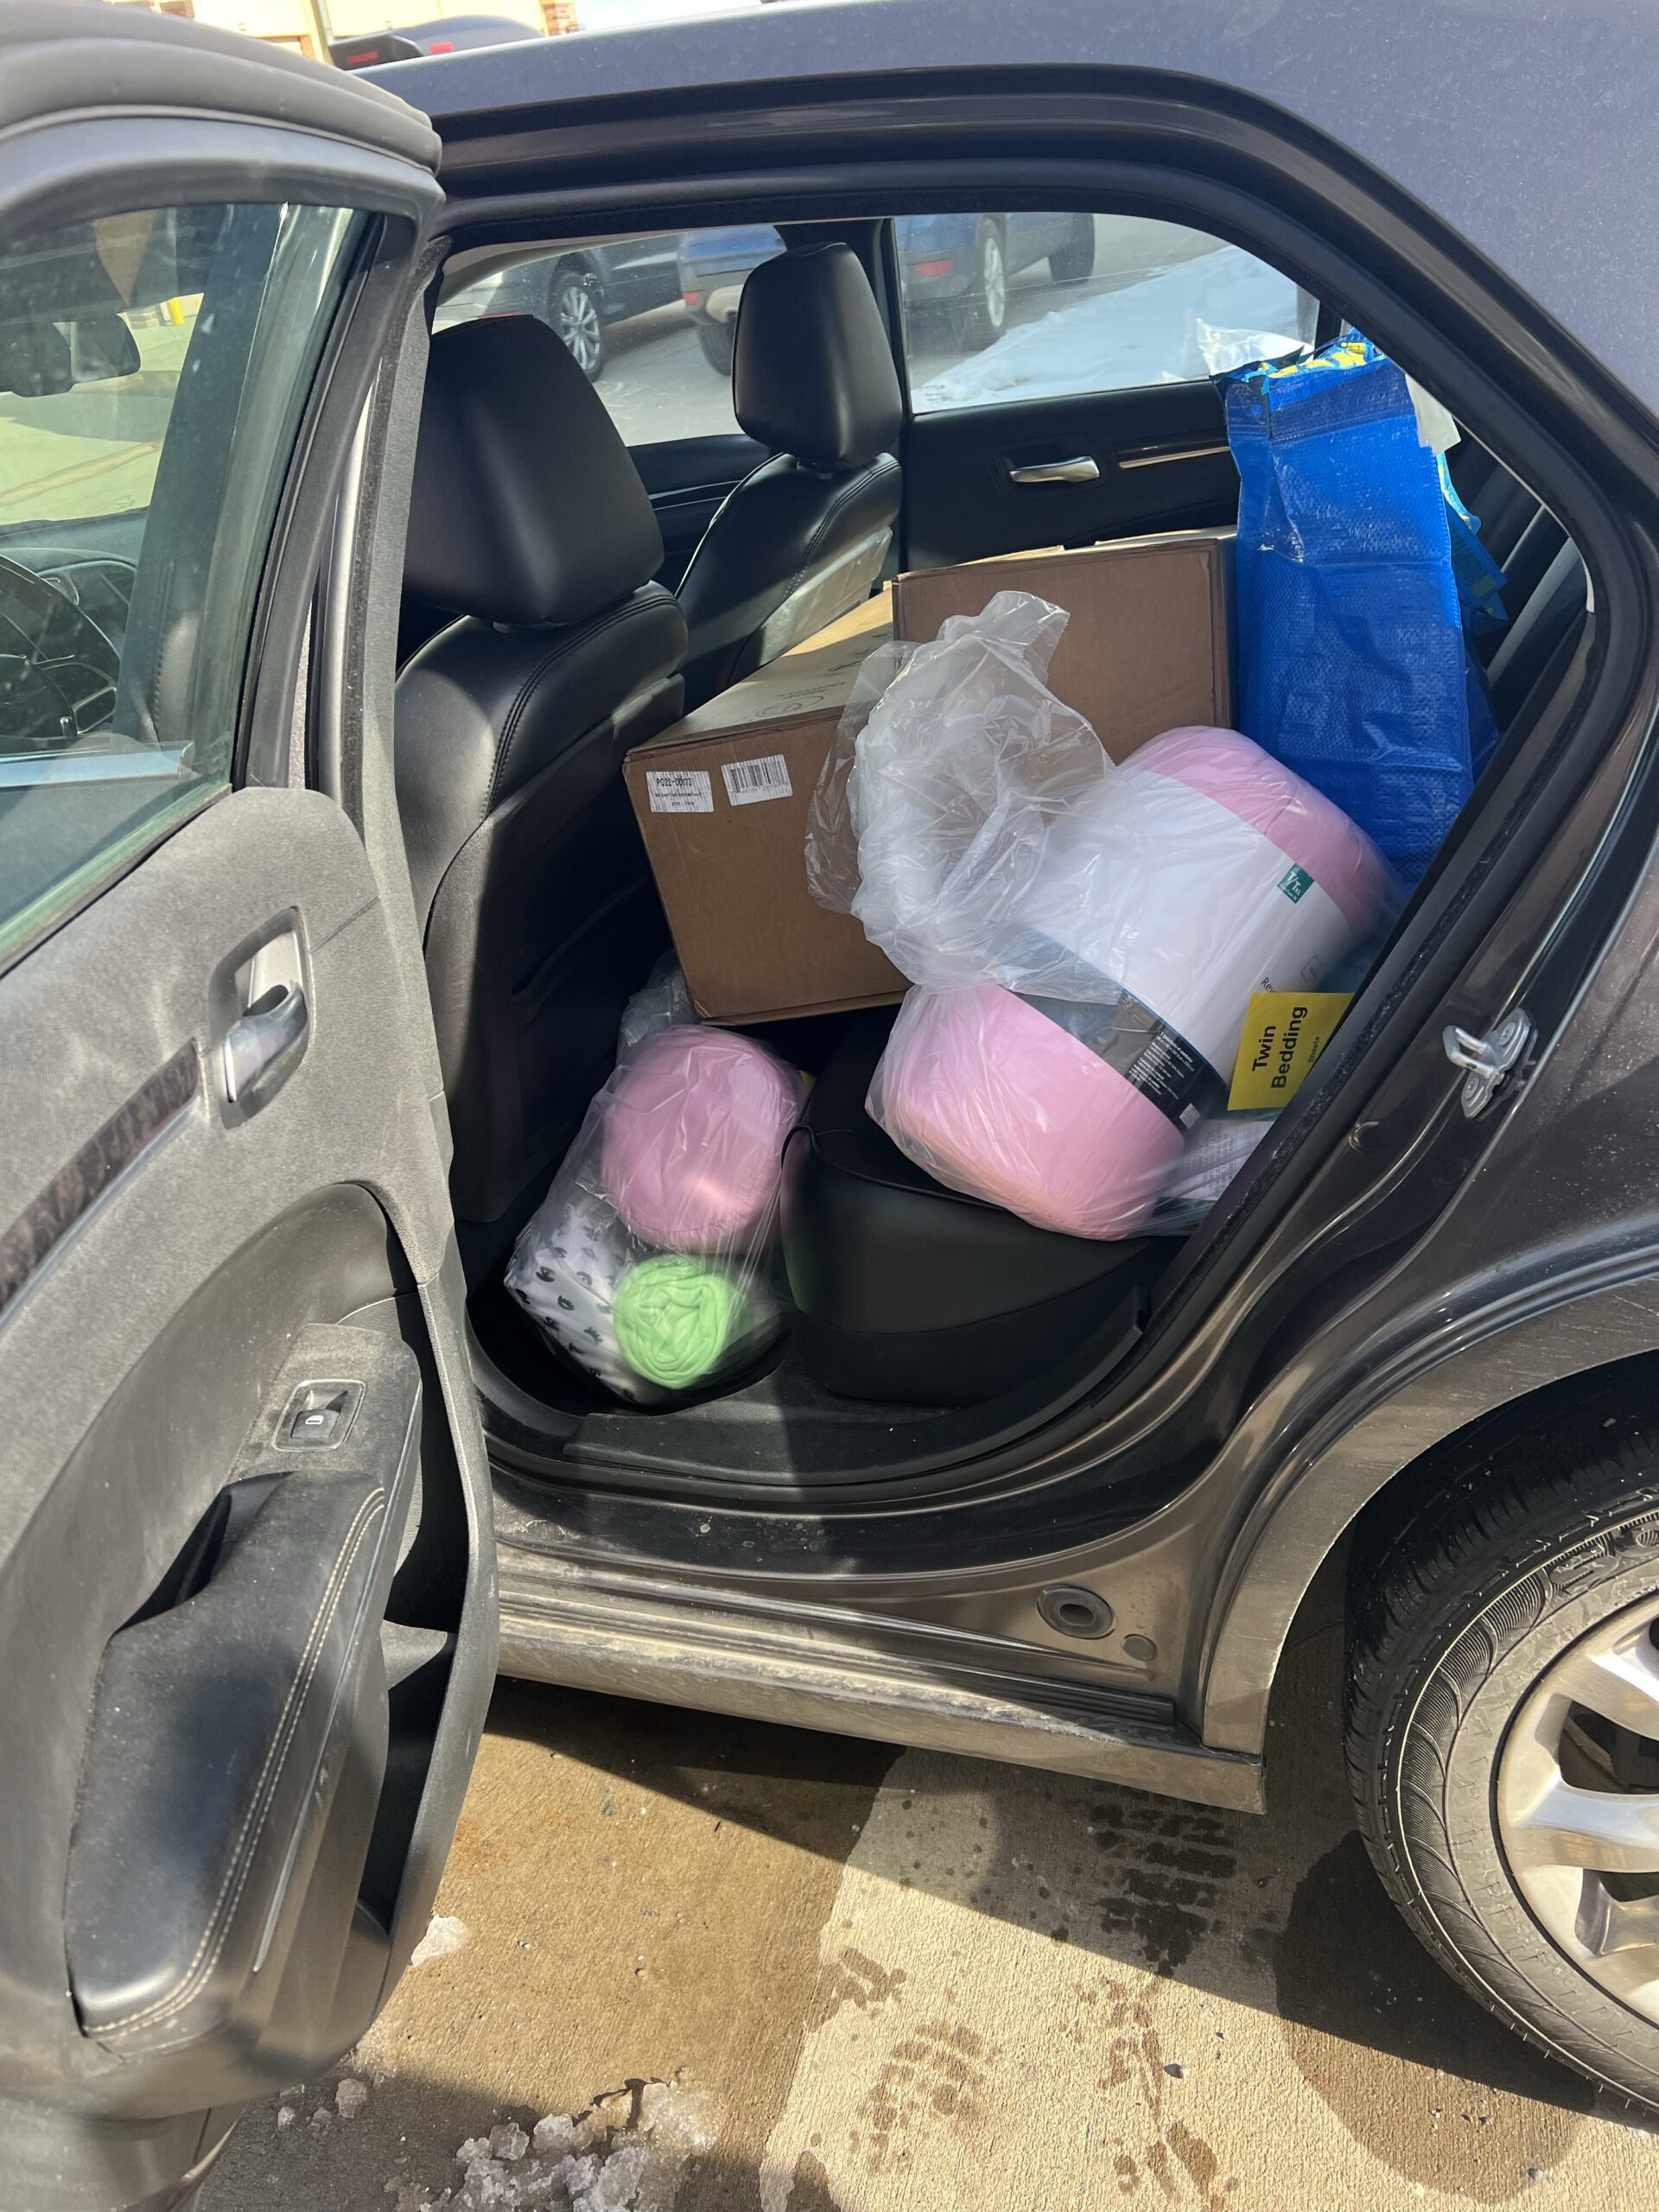 A car with many bags of items in the back.